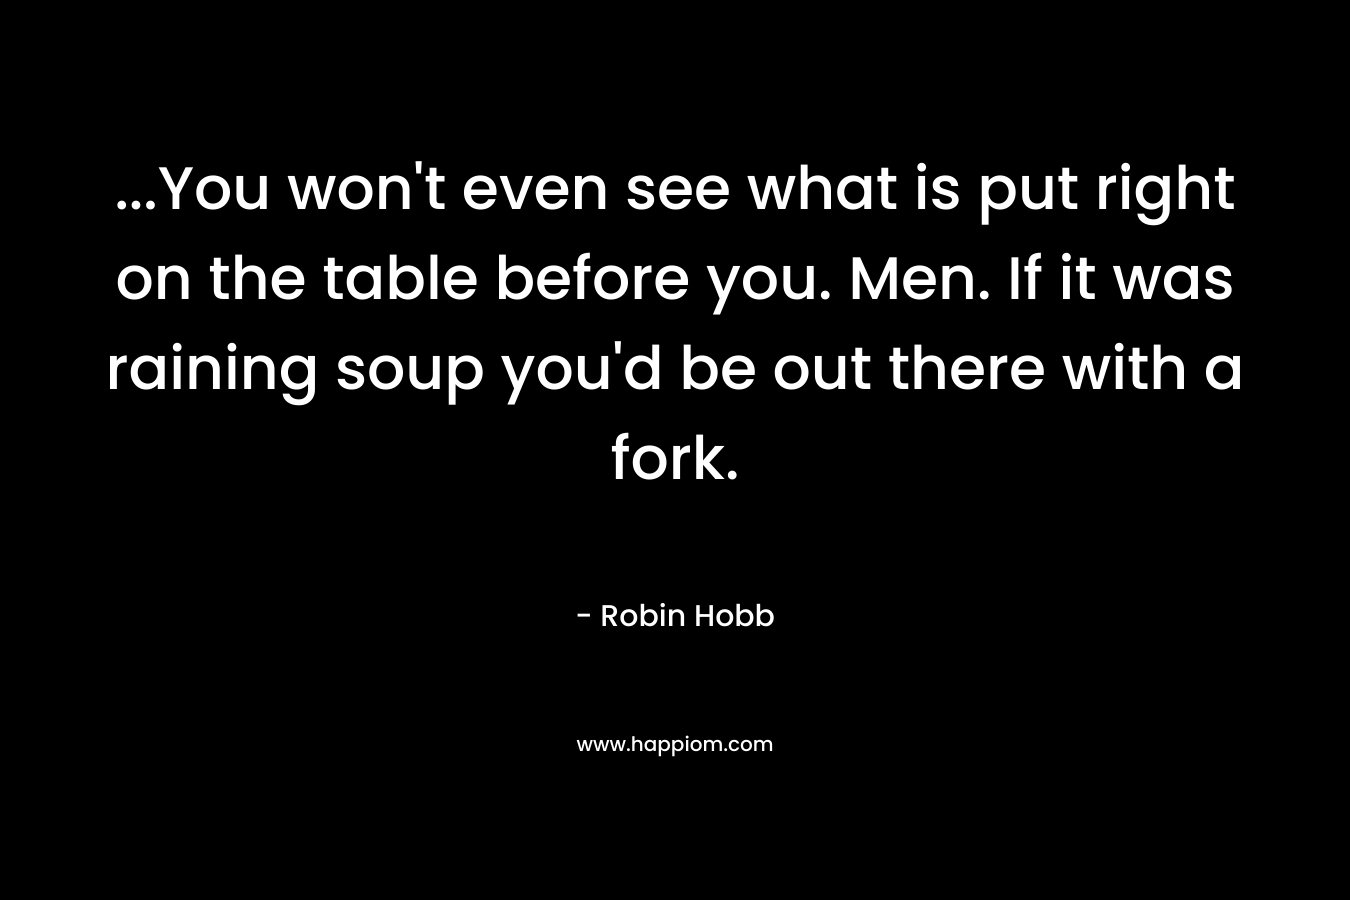 ...You won't even see what is put right on the table before you. Men. If it was raining soup you'd be out there with a fork.